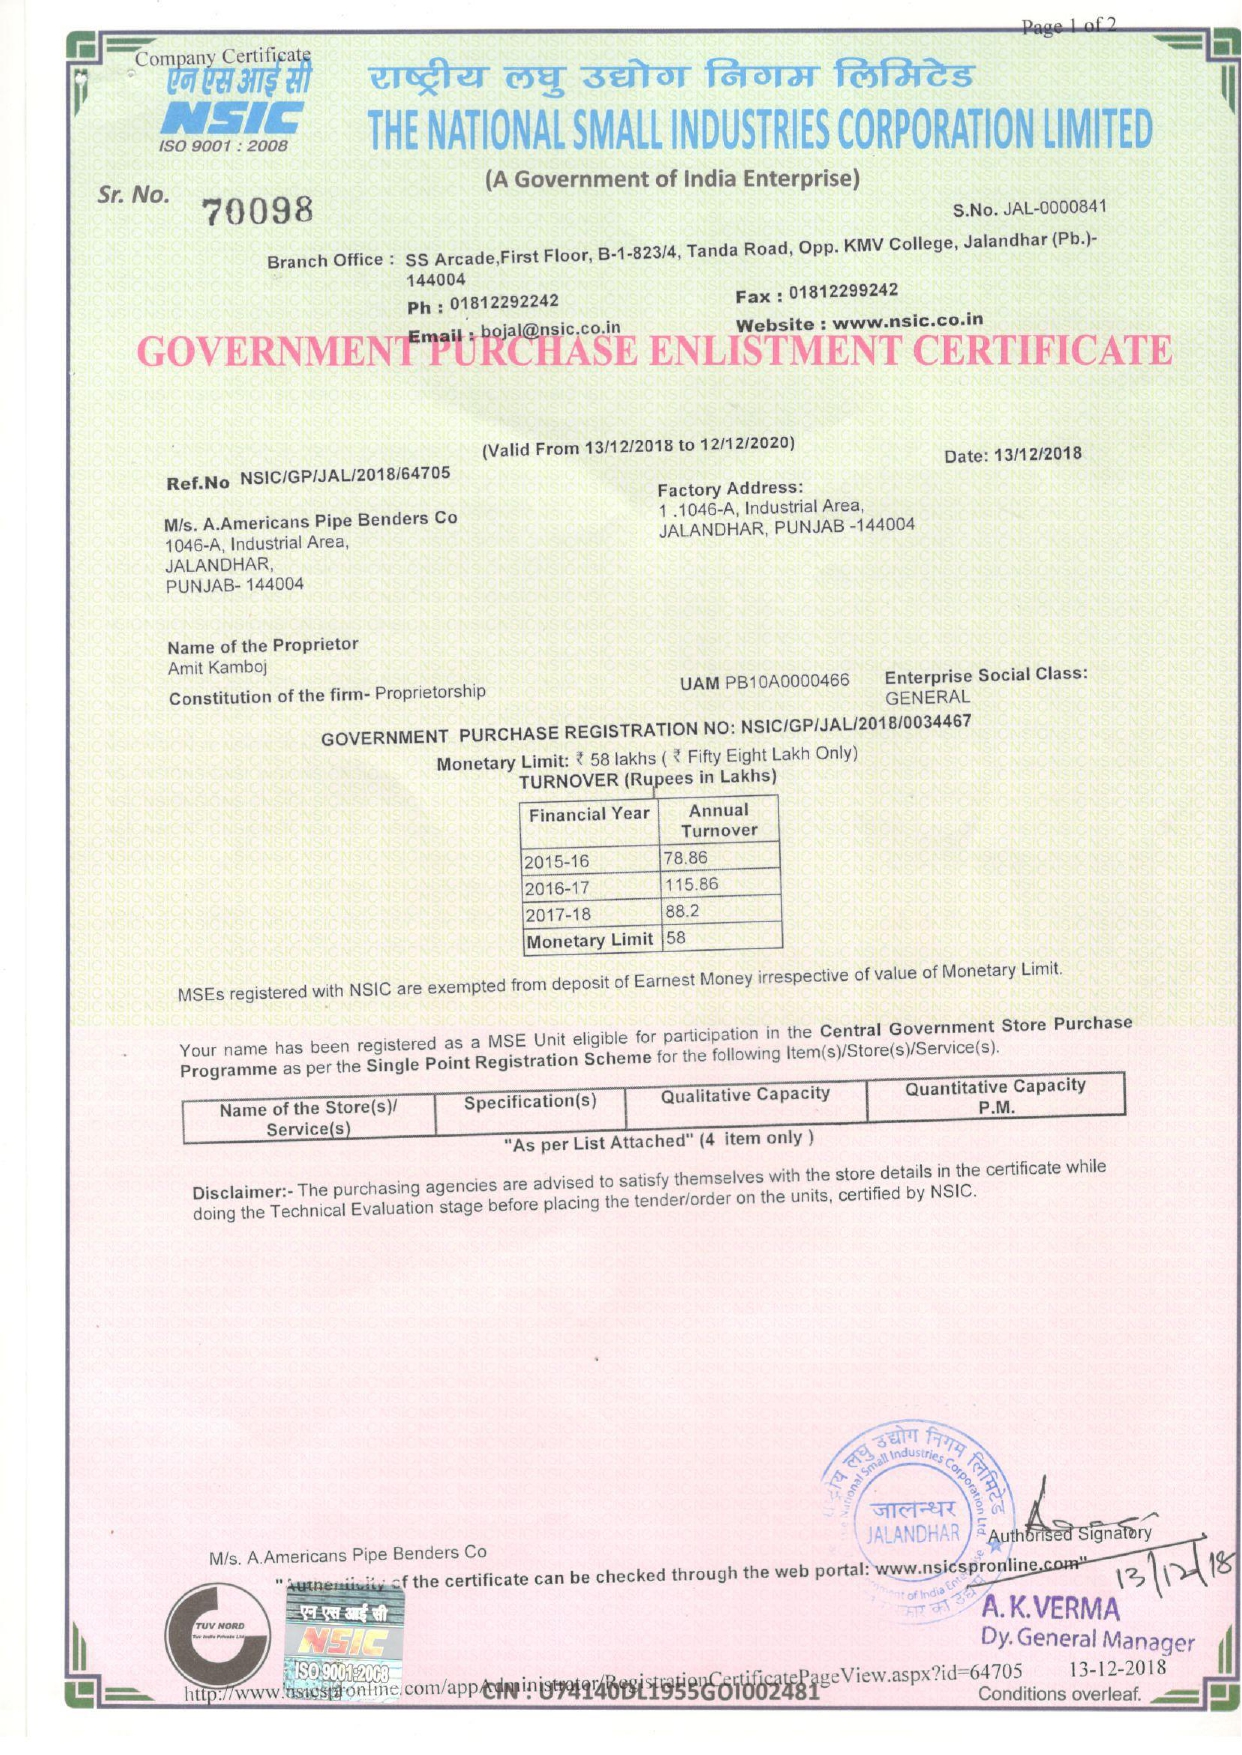 Government Purchase Enlistment Certificate